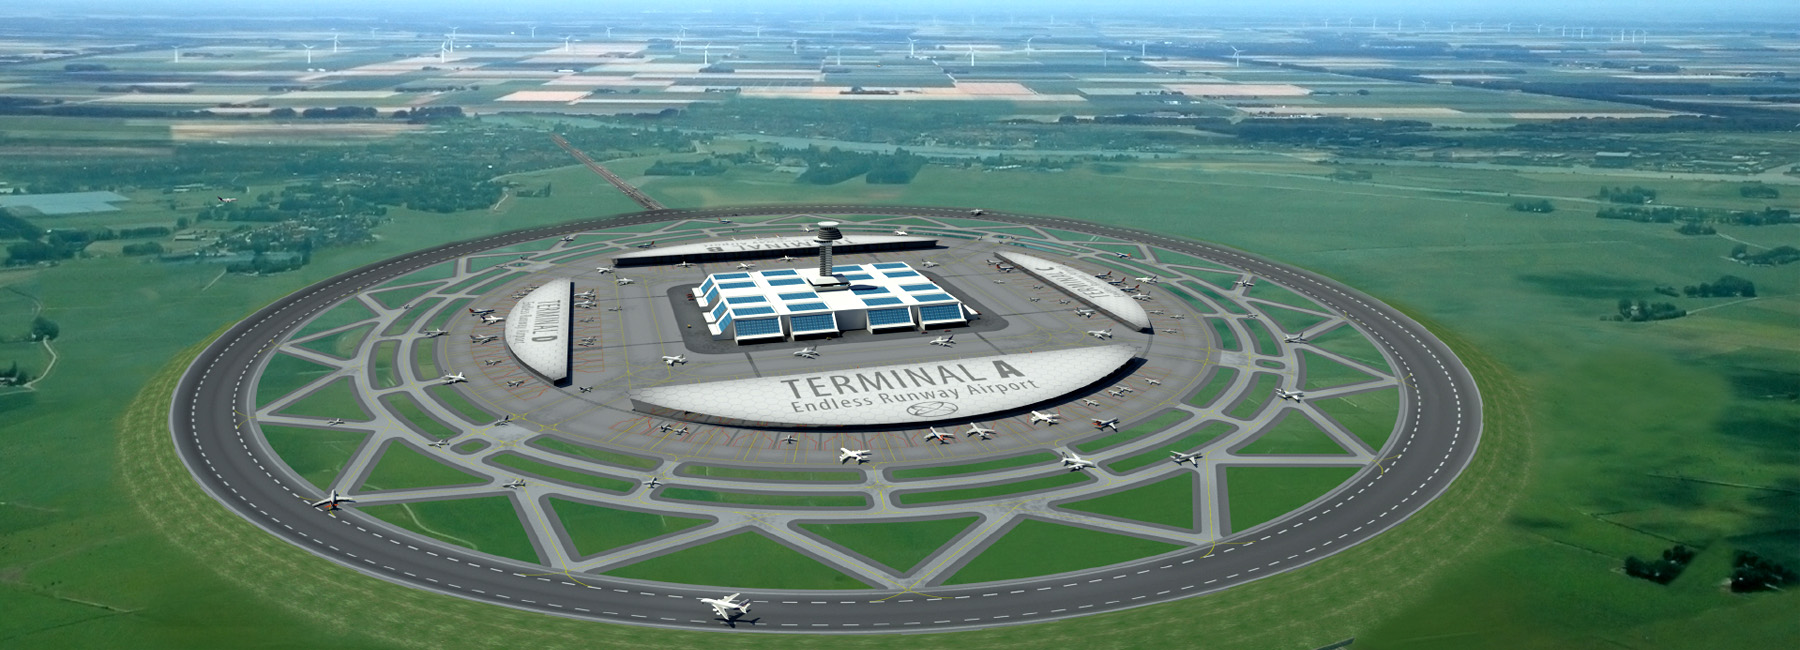 circular runway allows planes to take off and land in all directions